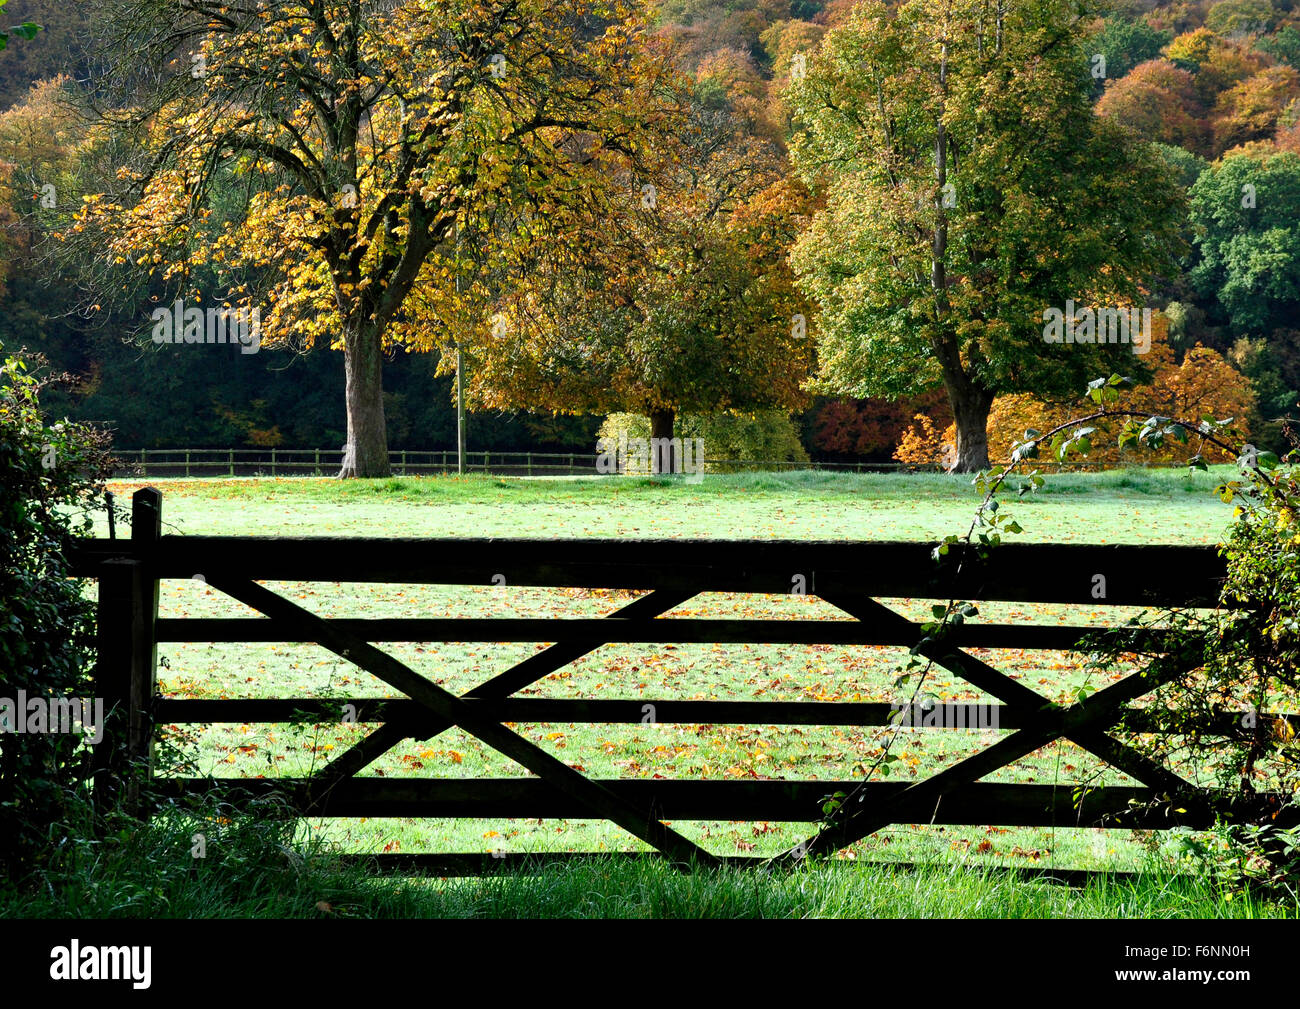 Bucks - Chiltern Hills - view over field gate - across meadow to autumn trees - russet - brown - green - sunlight and shadows - Stock Photo